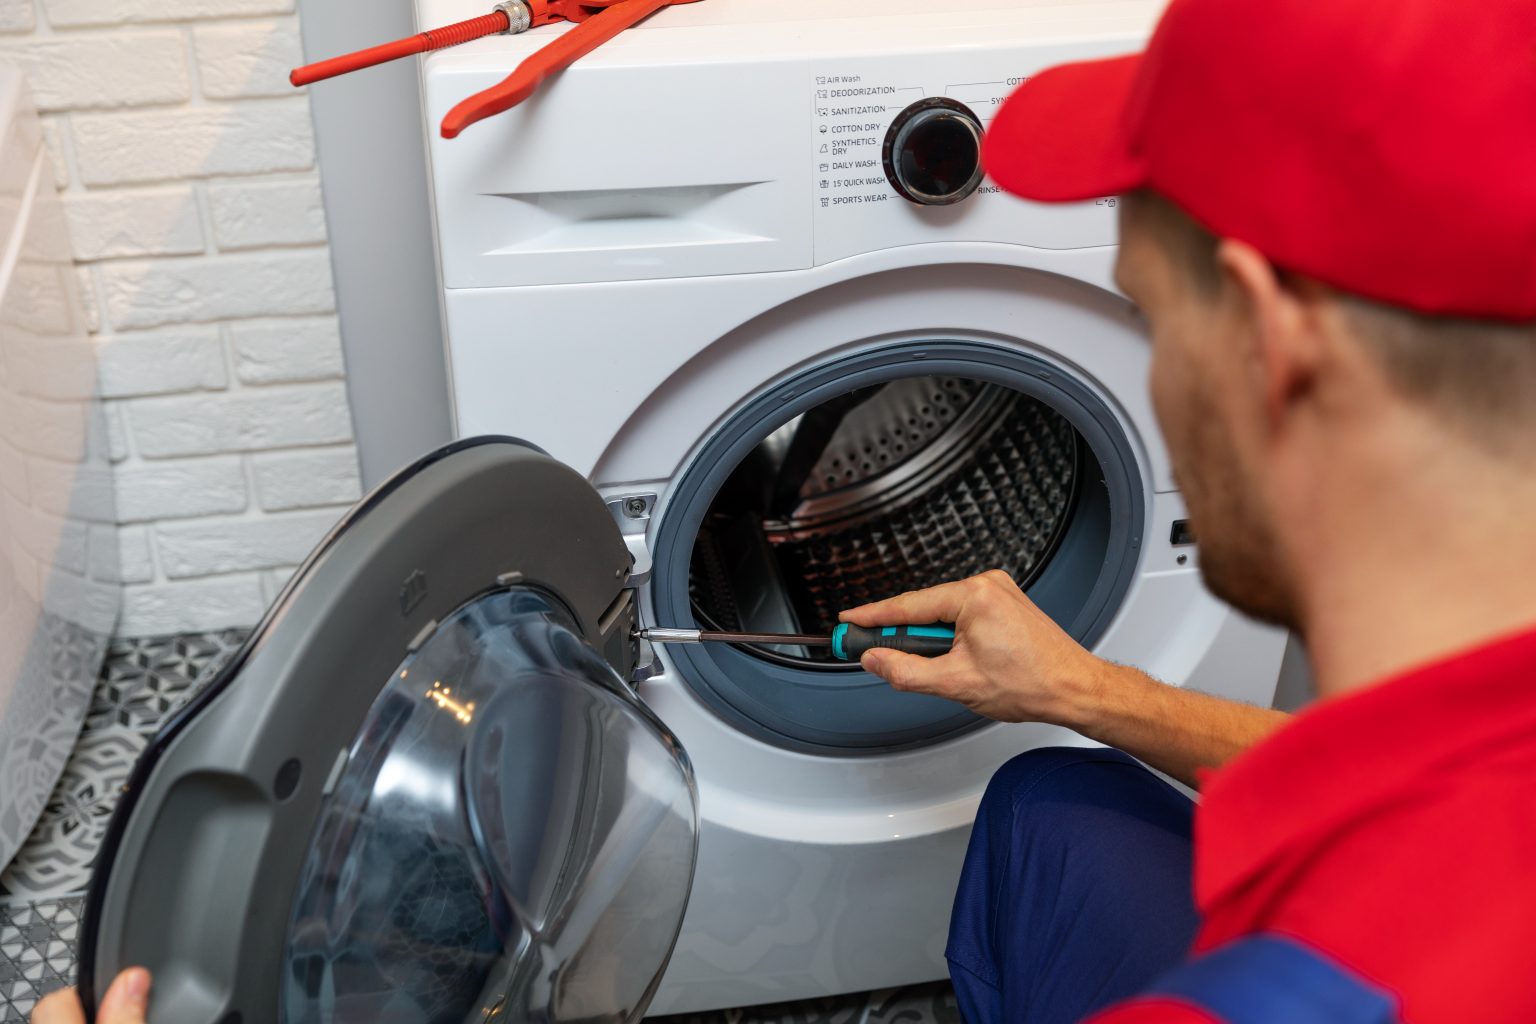 SMS-Appliances-Technician-With-Screwdriver-Repairing-Washing-Machine